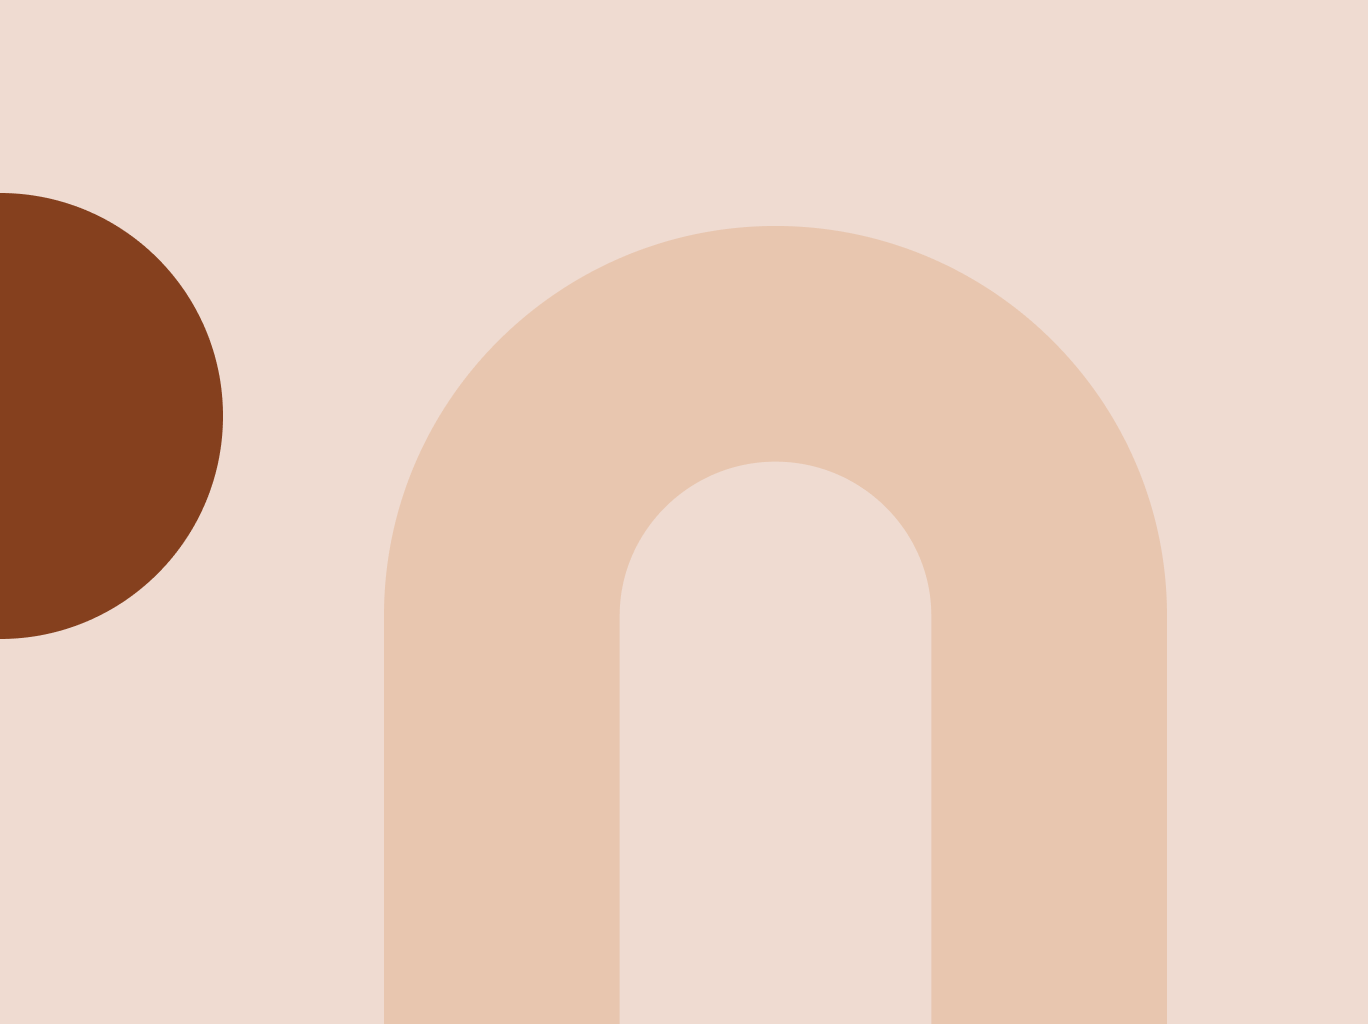 A beige and brown background with a circle in the middle.